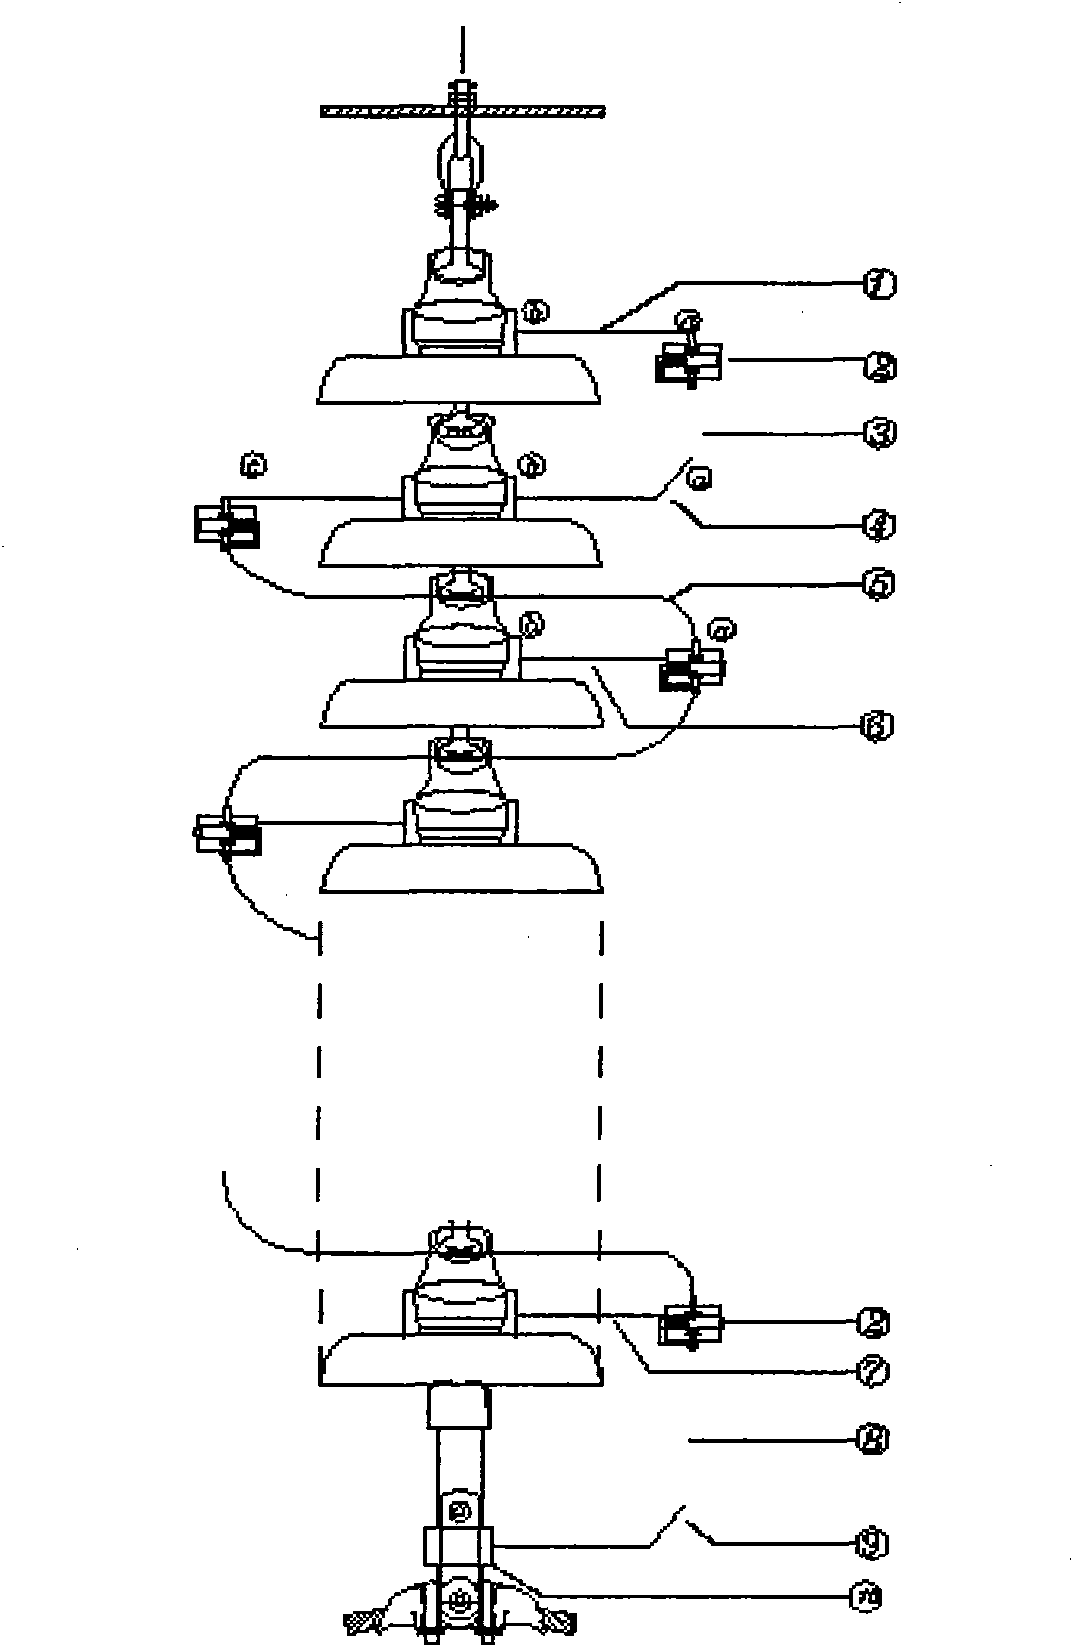 Lightning protection device with combination of multigap driven arc extinguishing and driving arc extinguishing by multipoint strong airflow